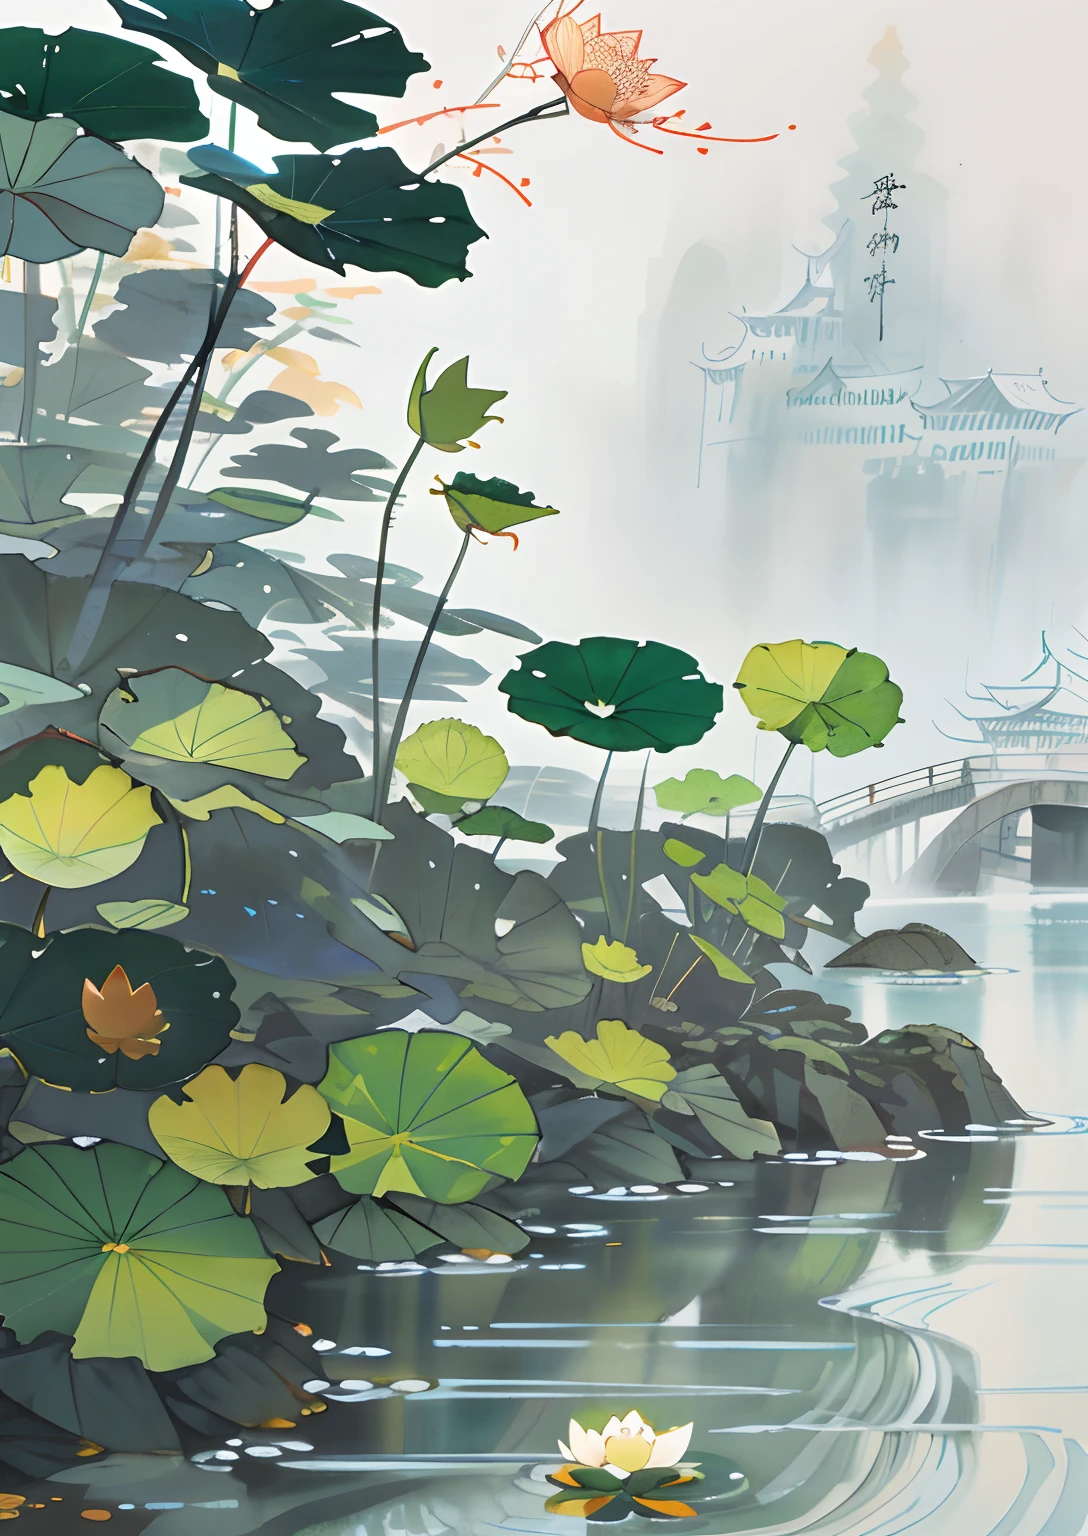 white backgrounid，There are fish，there are waters，There are lotus leaves，There are dew drops on the lotus leaves，China-style，There are buildings